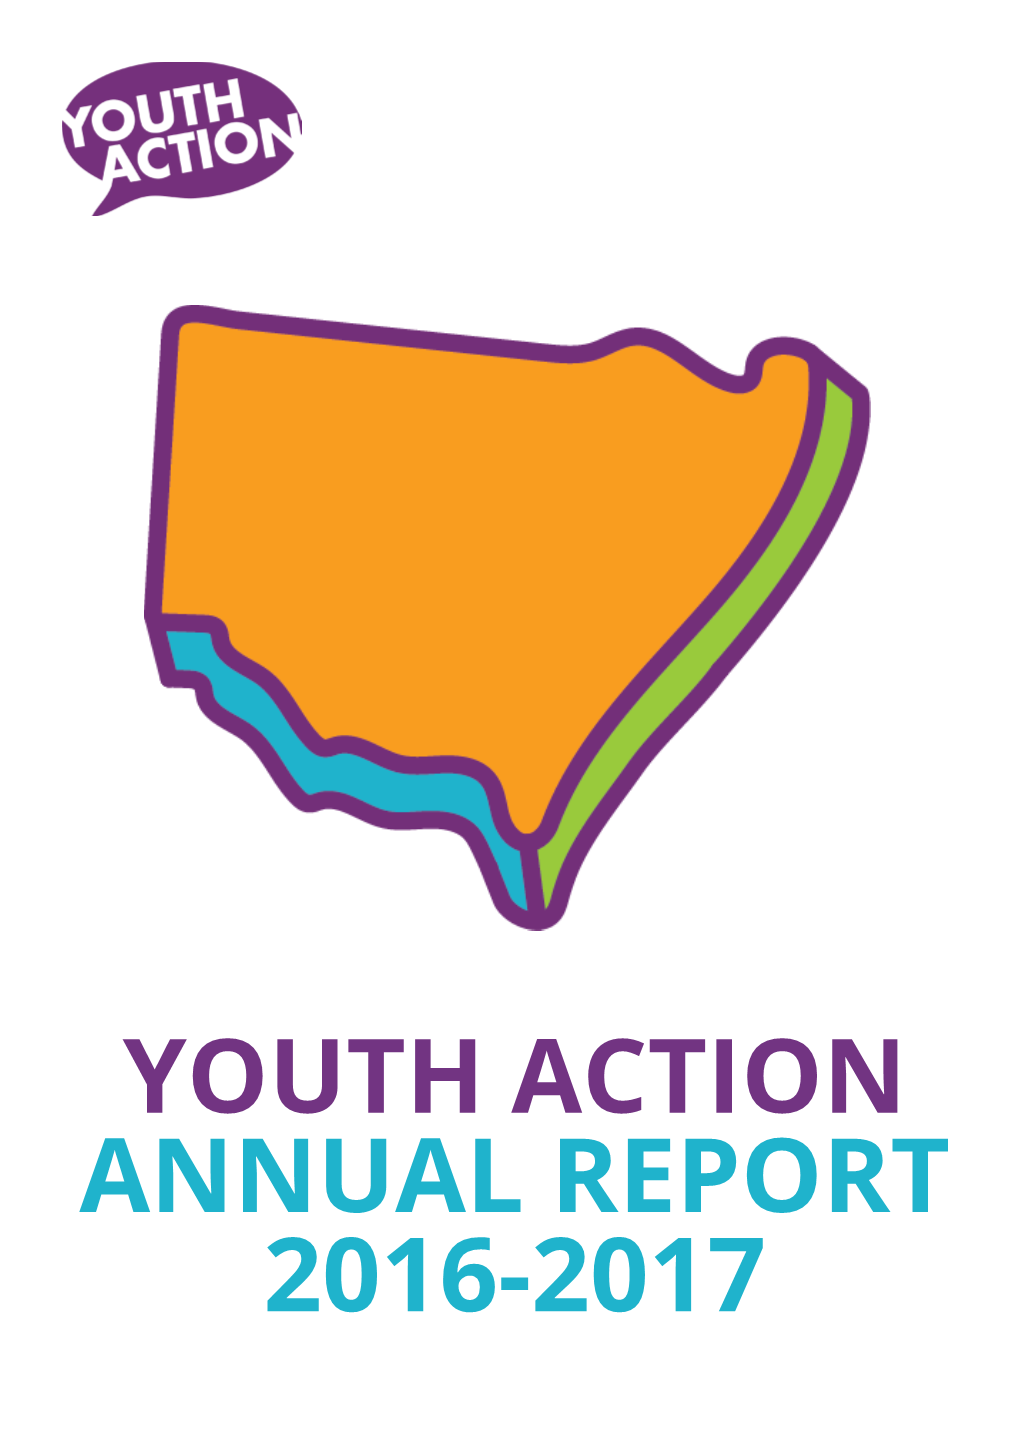 Youth Action Annual Report 2016-2017